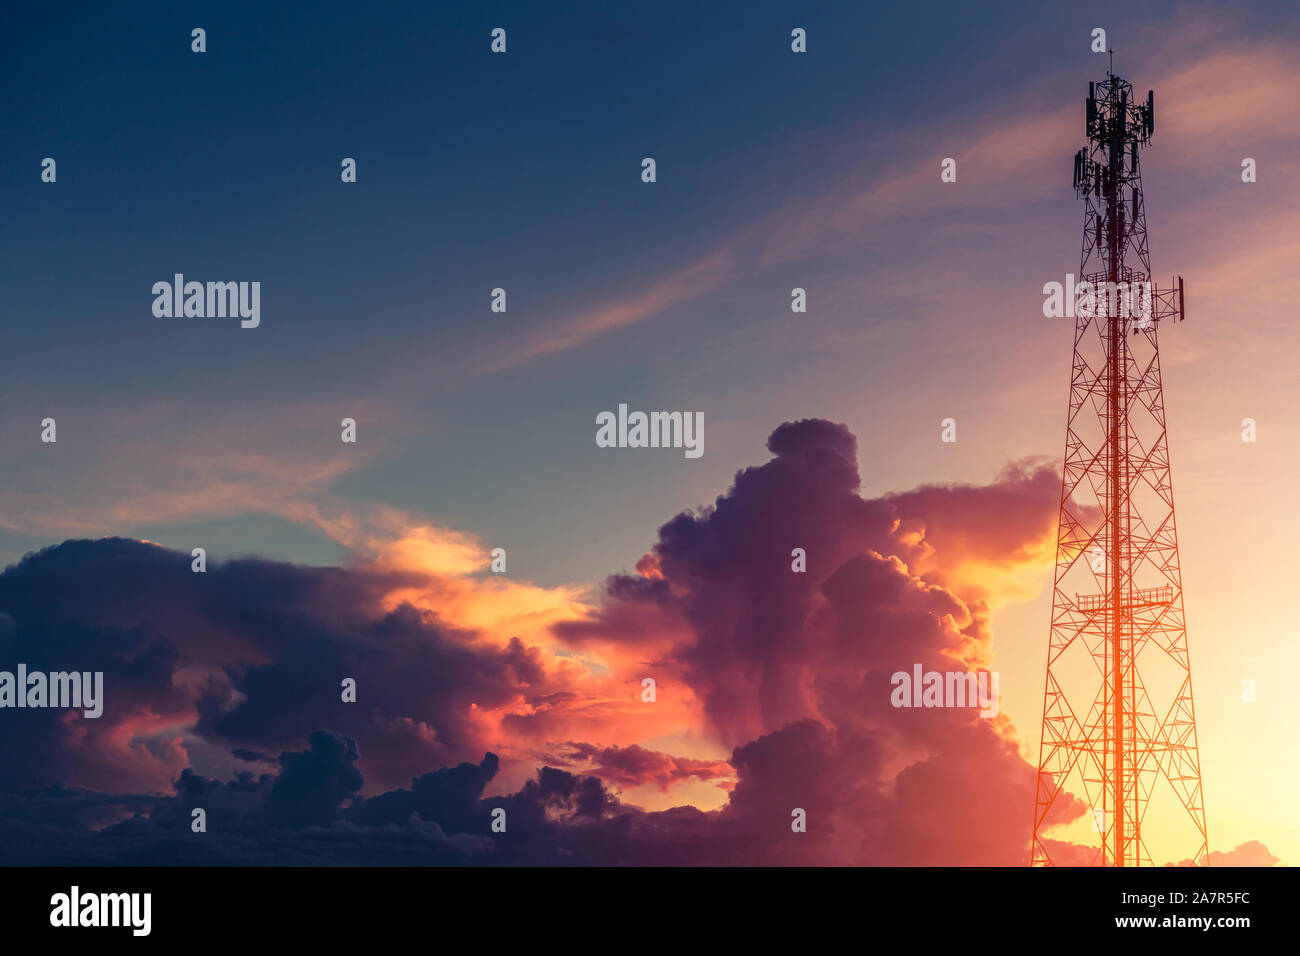 Dramatic dusk sky colorful cloud with communication signal tower silhouette. Stock Photo